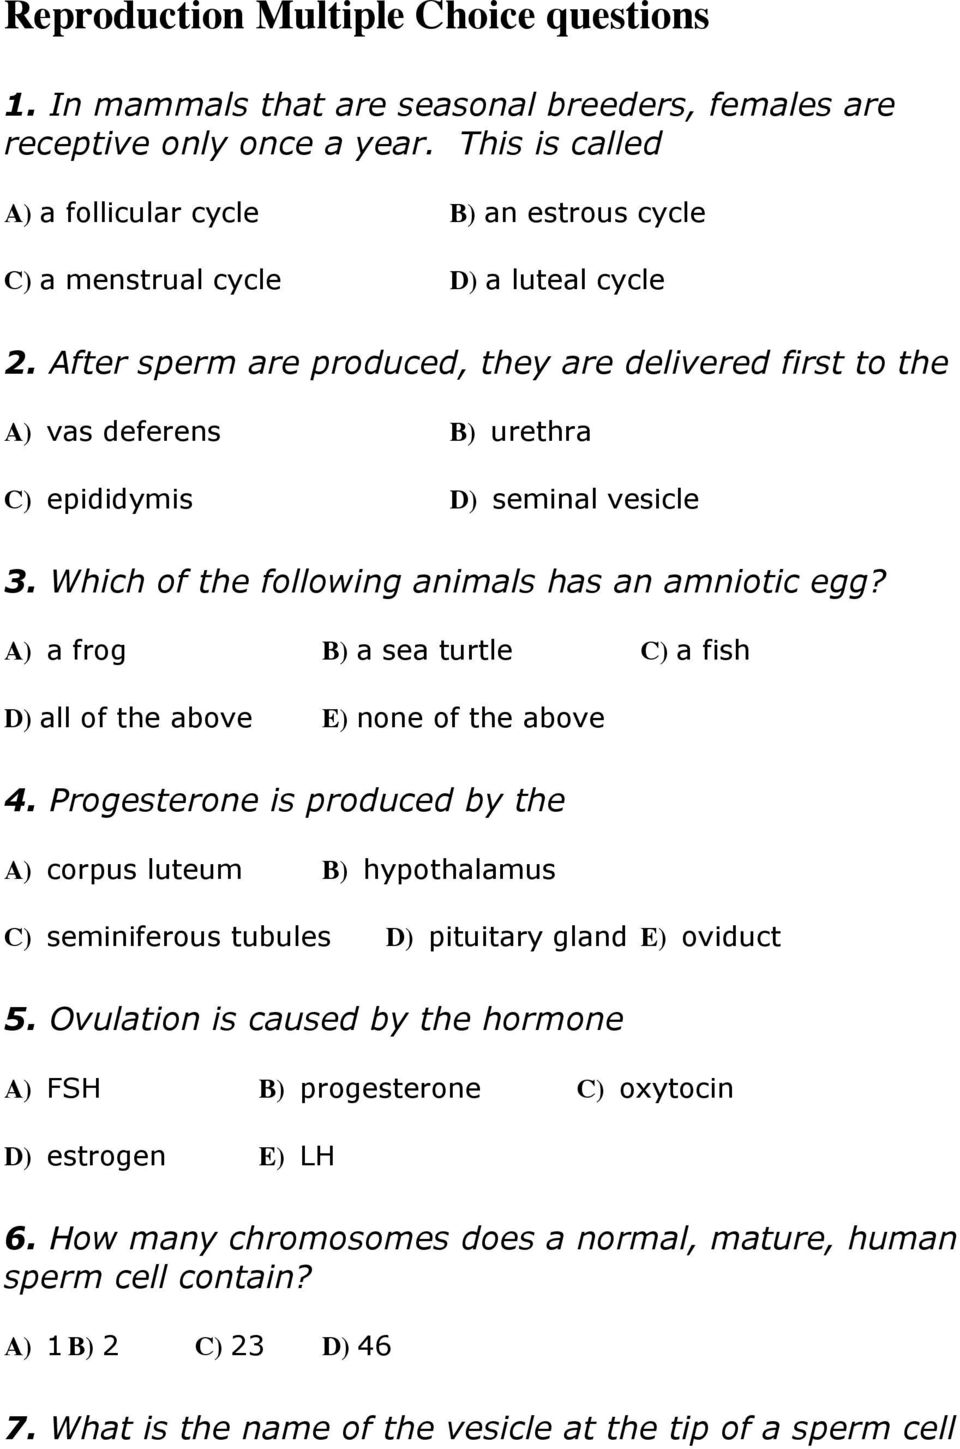 After sperm are produced, they are delivered first to the A) vas deferens B) urethra C) epididymis D) seminal vesicle 3. Which of the following animals has an amniotic egg?